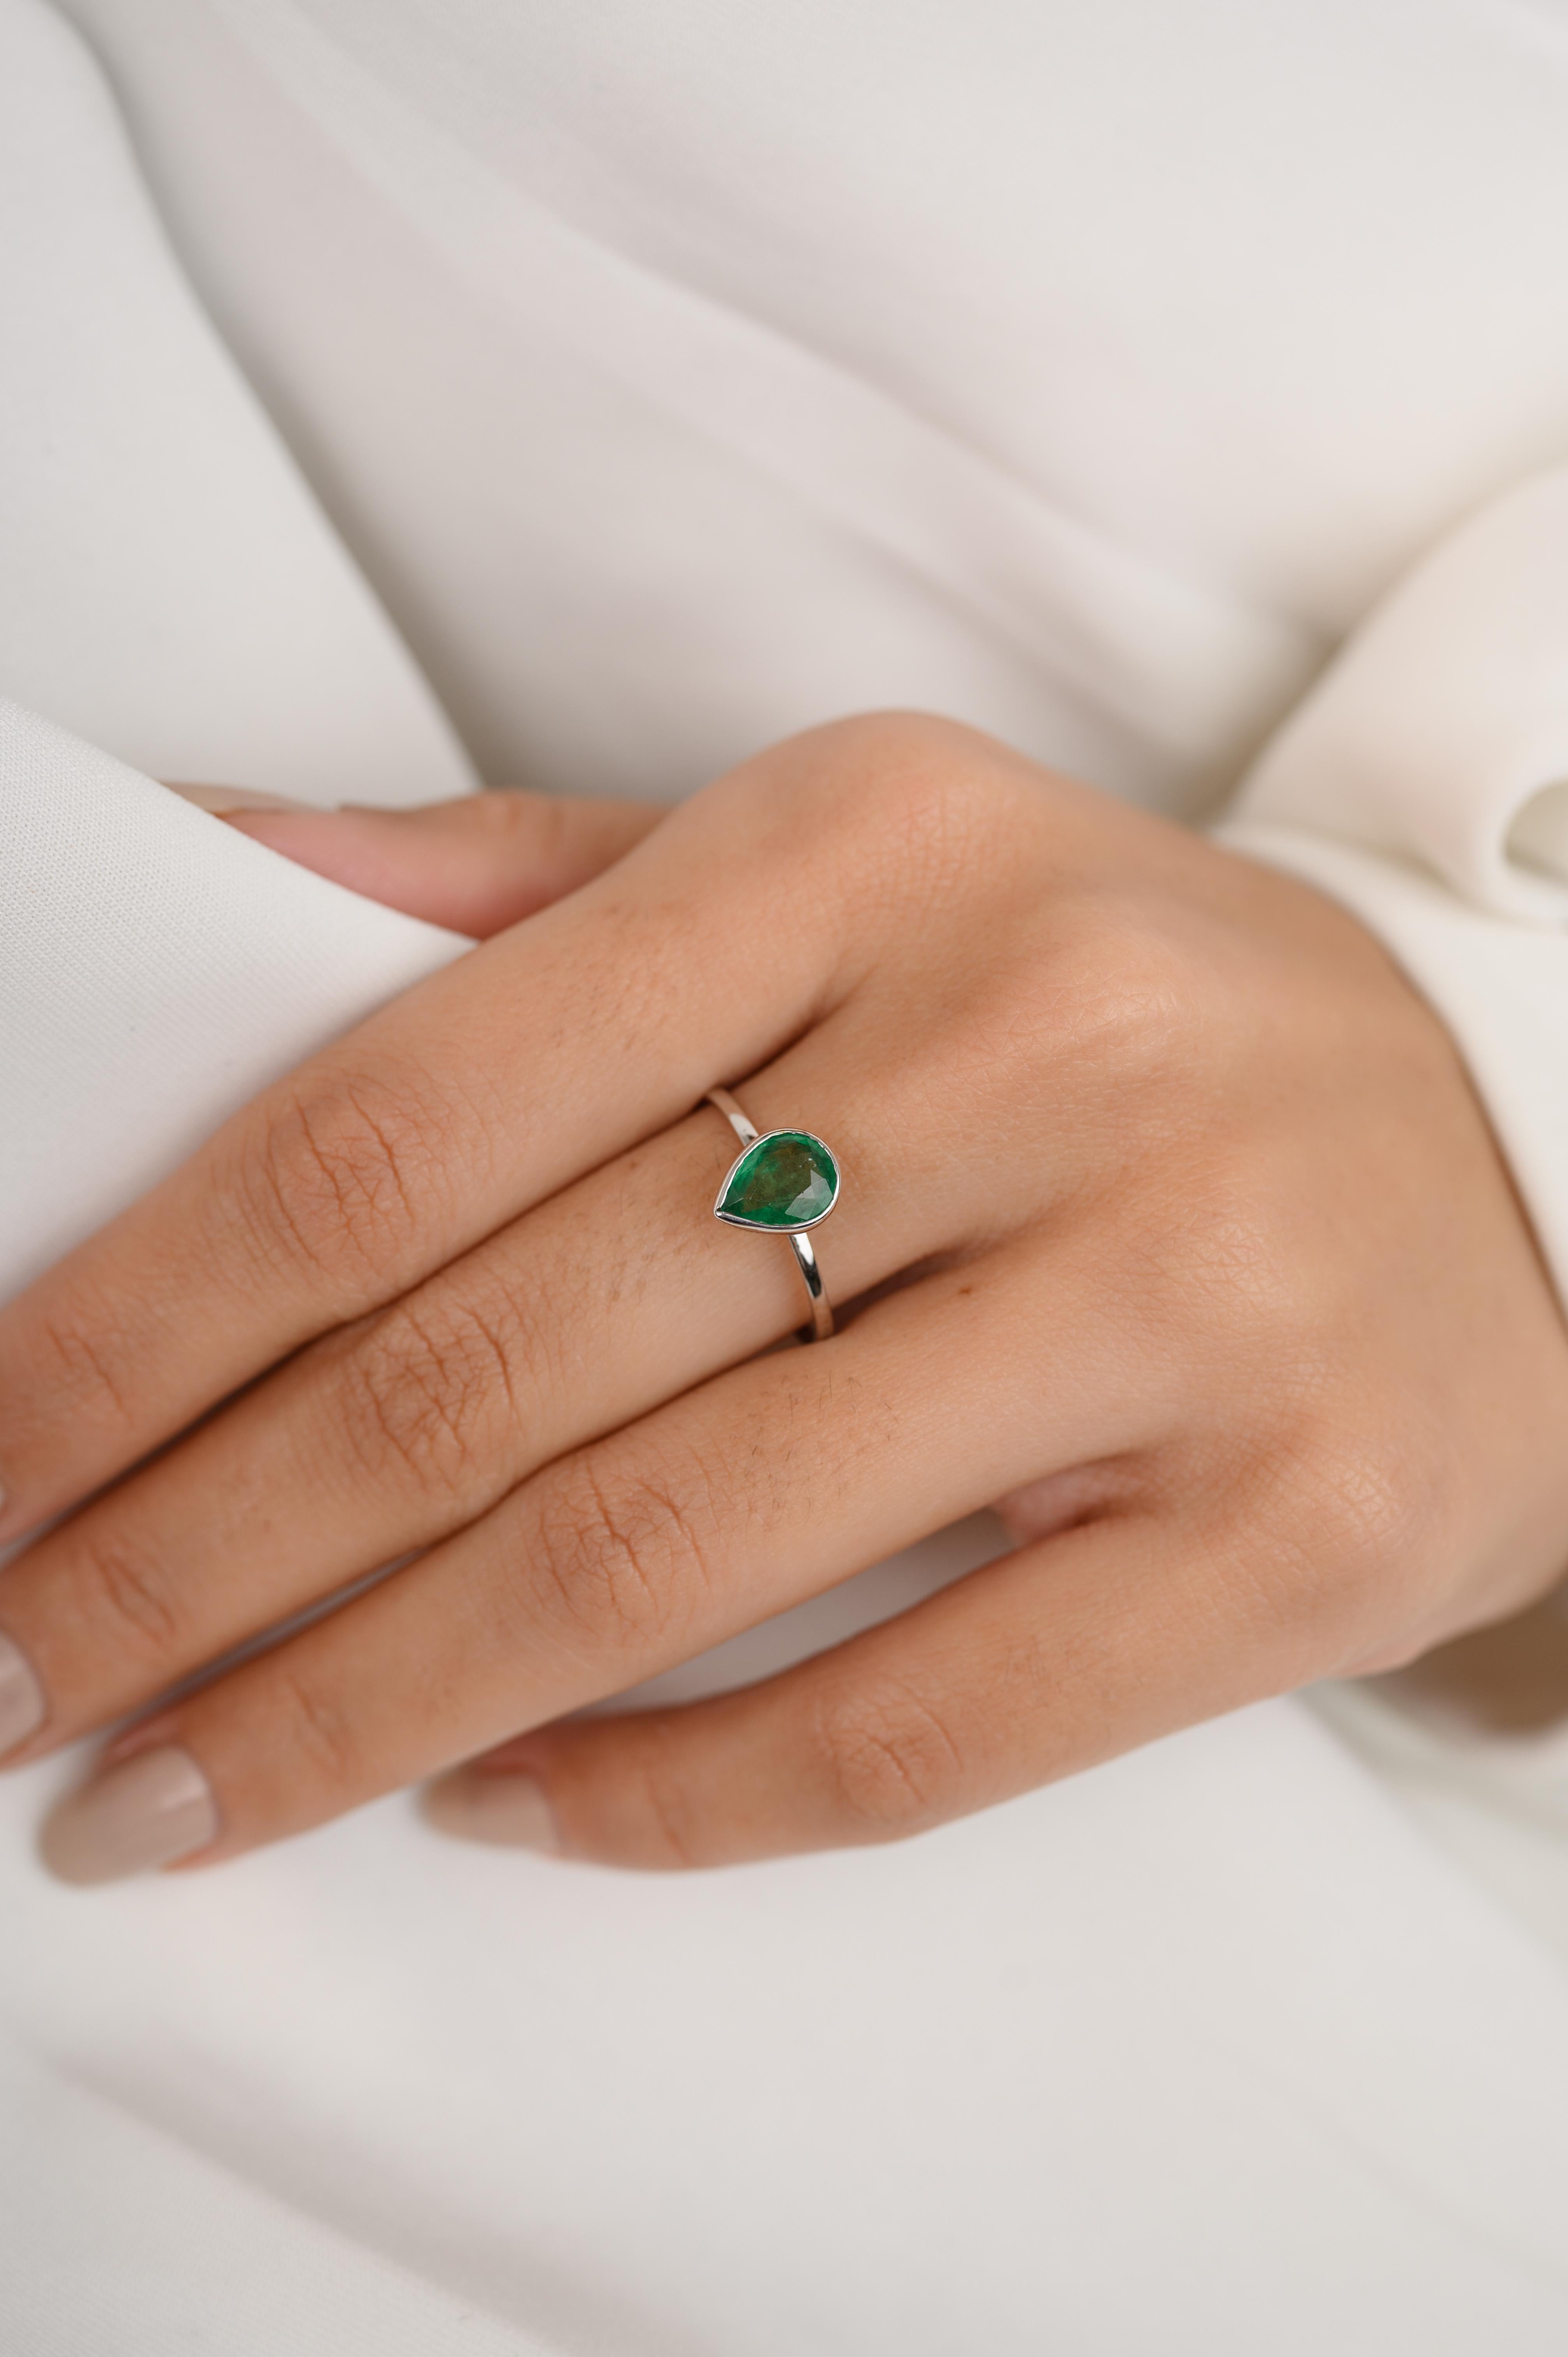 For Sale:  Natural Pear Cut Emerald Birthstone Ring Bezel Set in 18k White Gold Settings 6